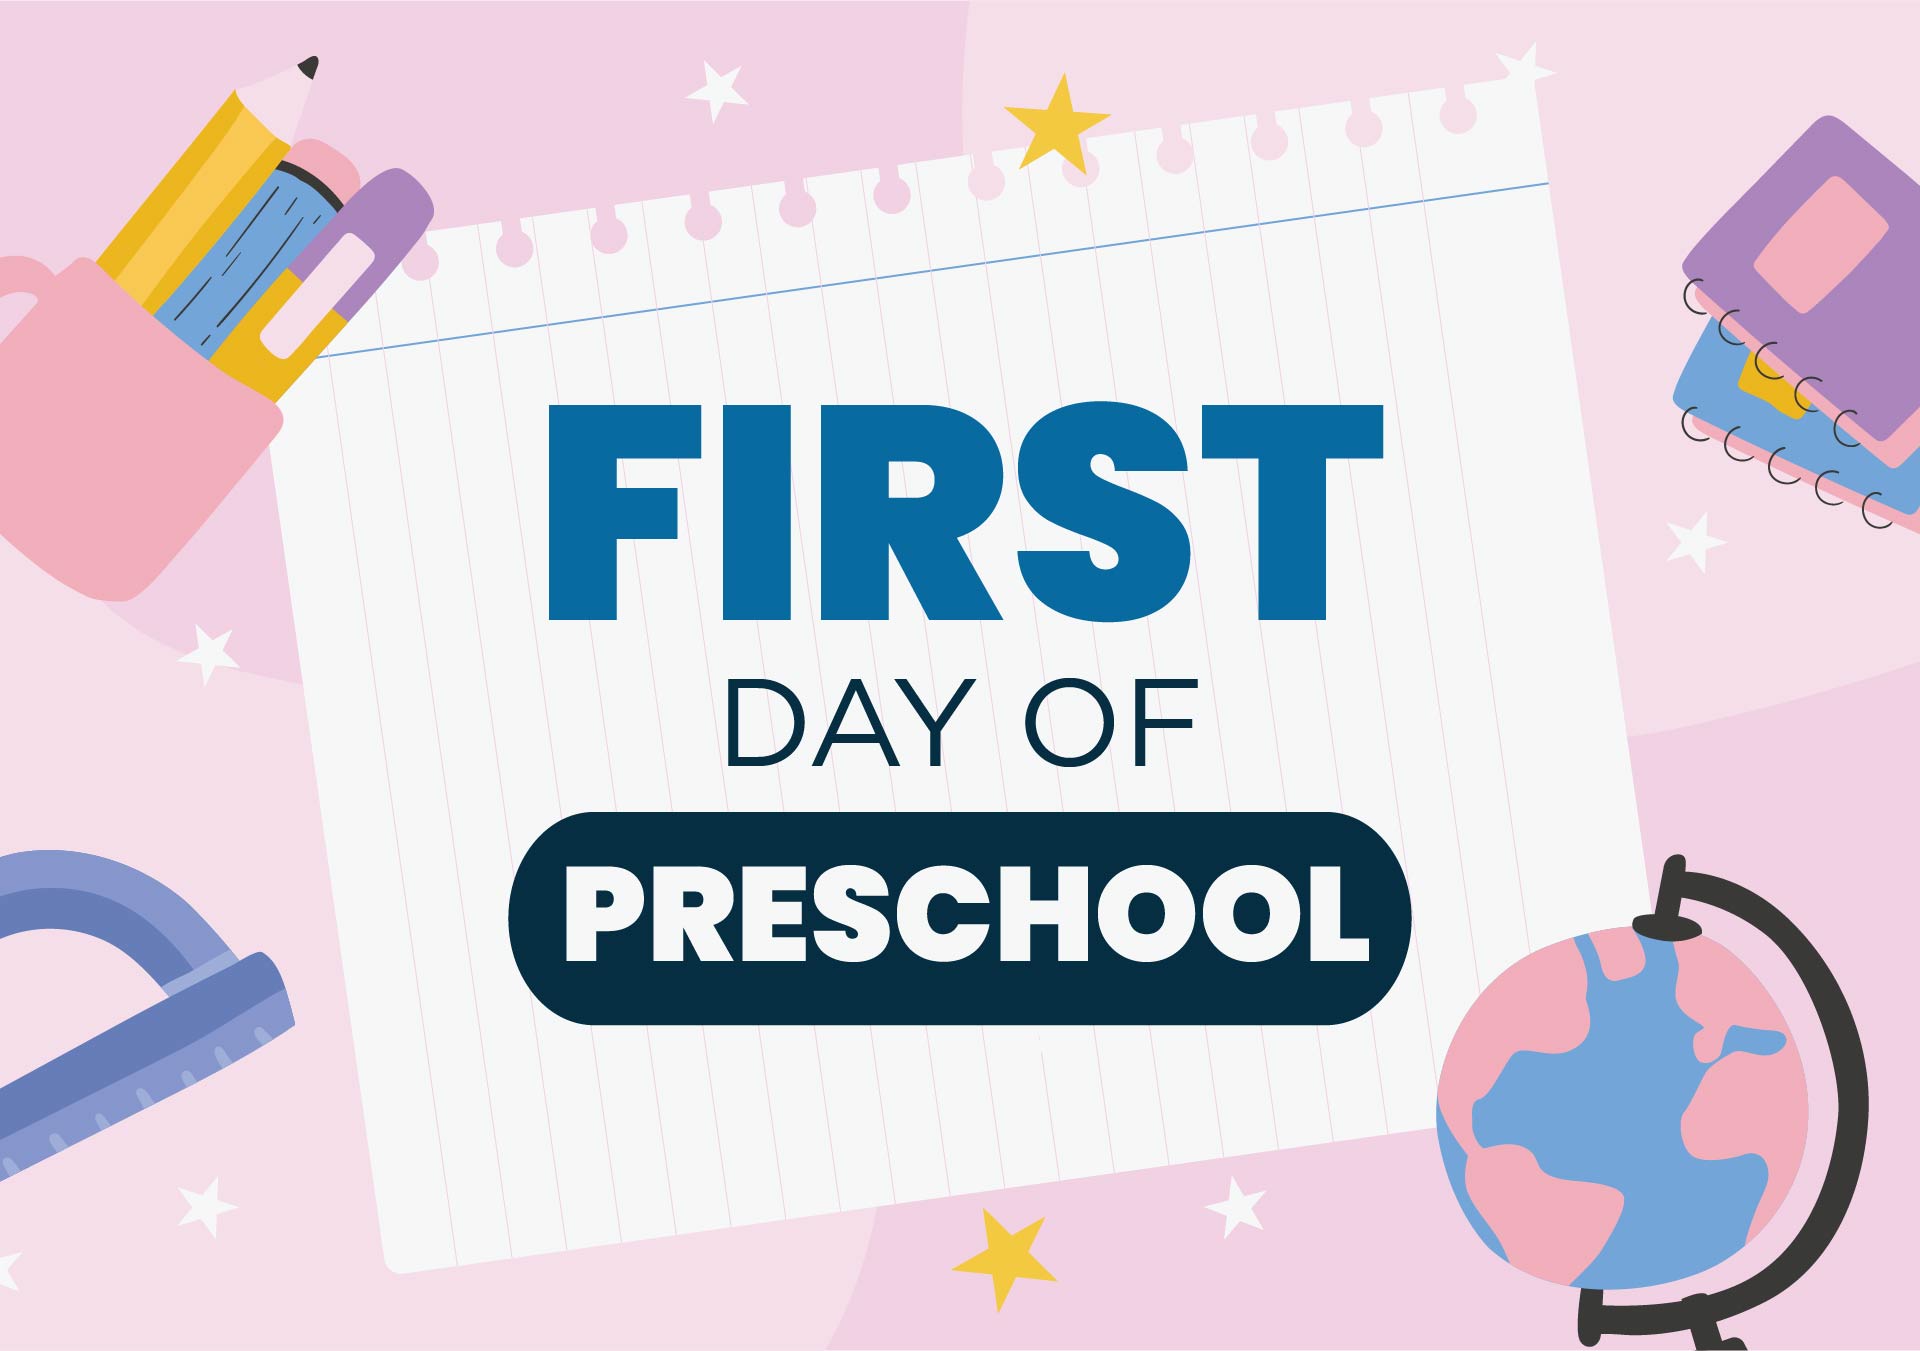 9 Best Images Of First Day Of Preschool Printable First Day Of 